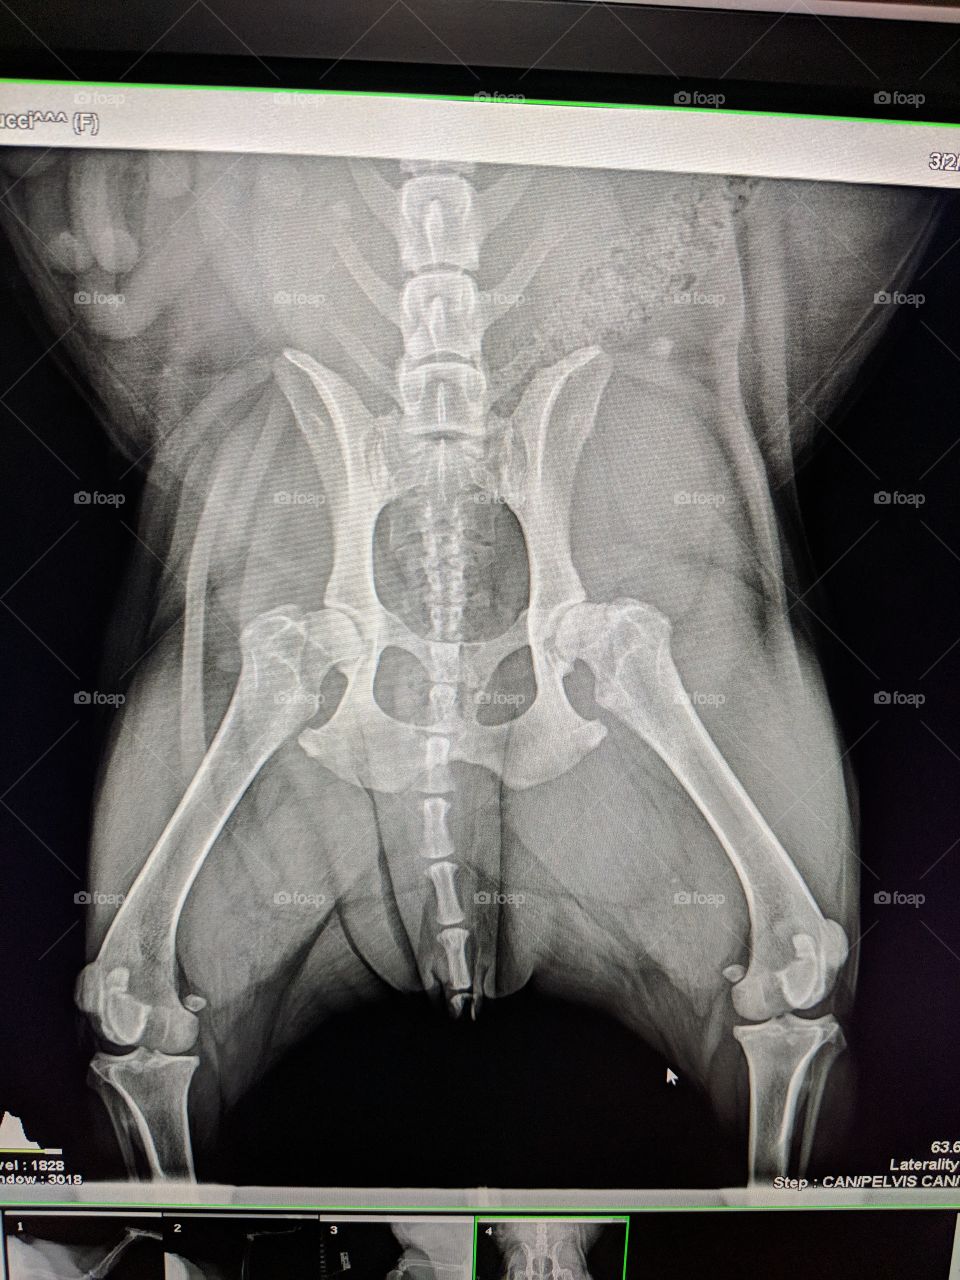 Radiograph of a dog's pelvis